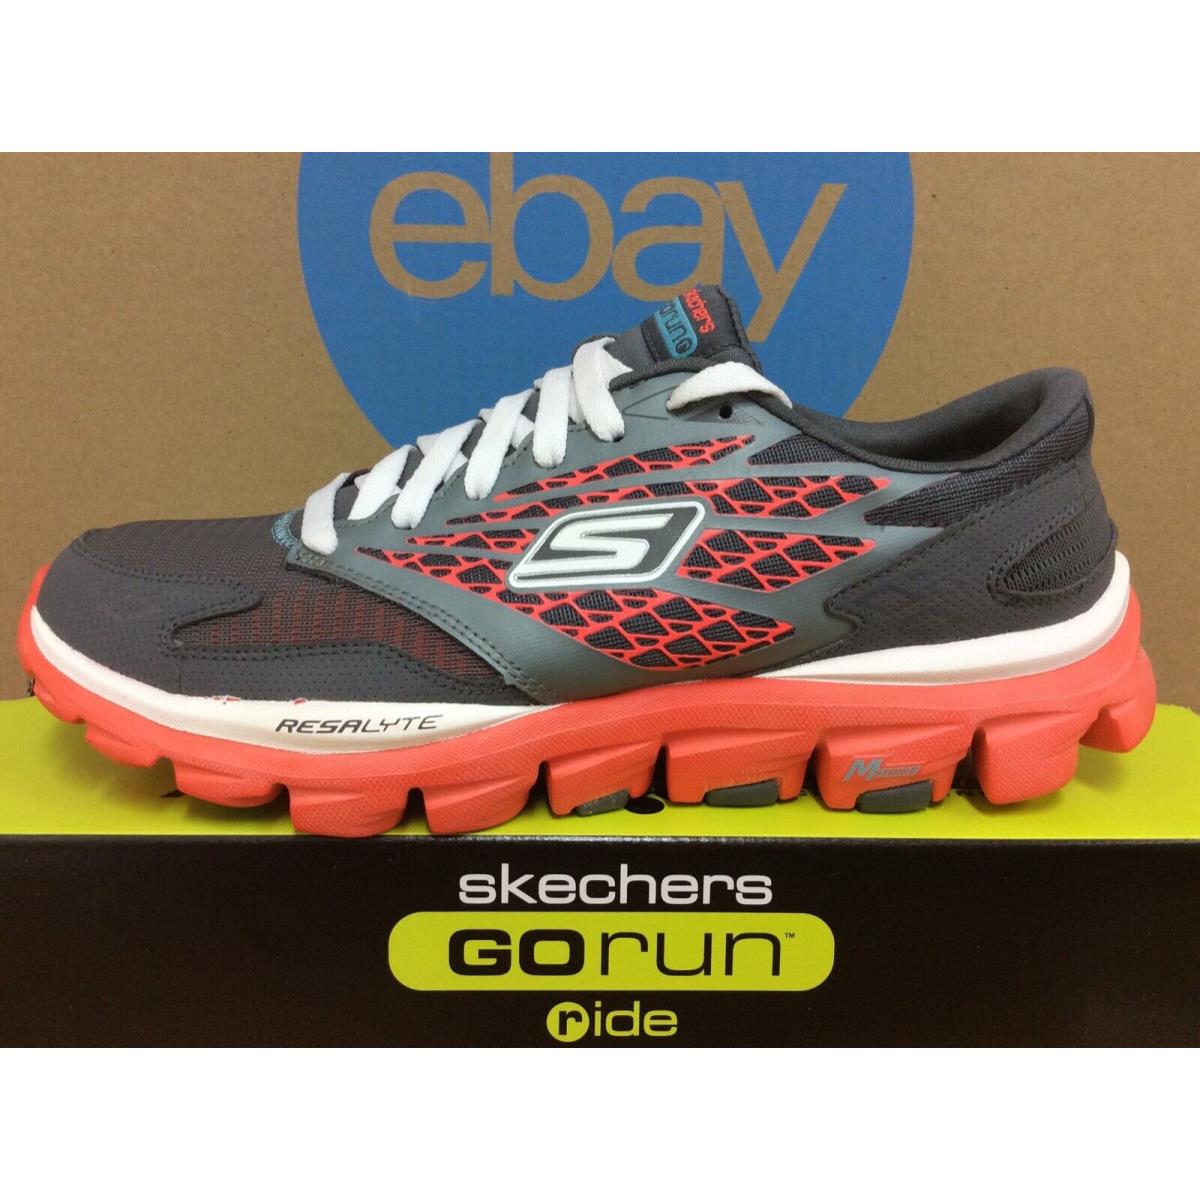 Skechers shoes Run Ride - Charcoal Coral 6